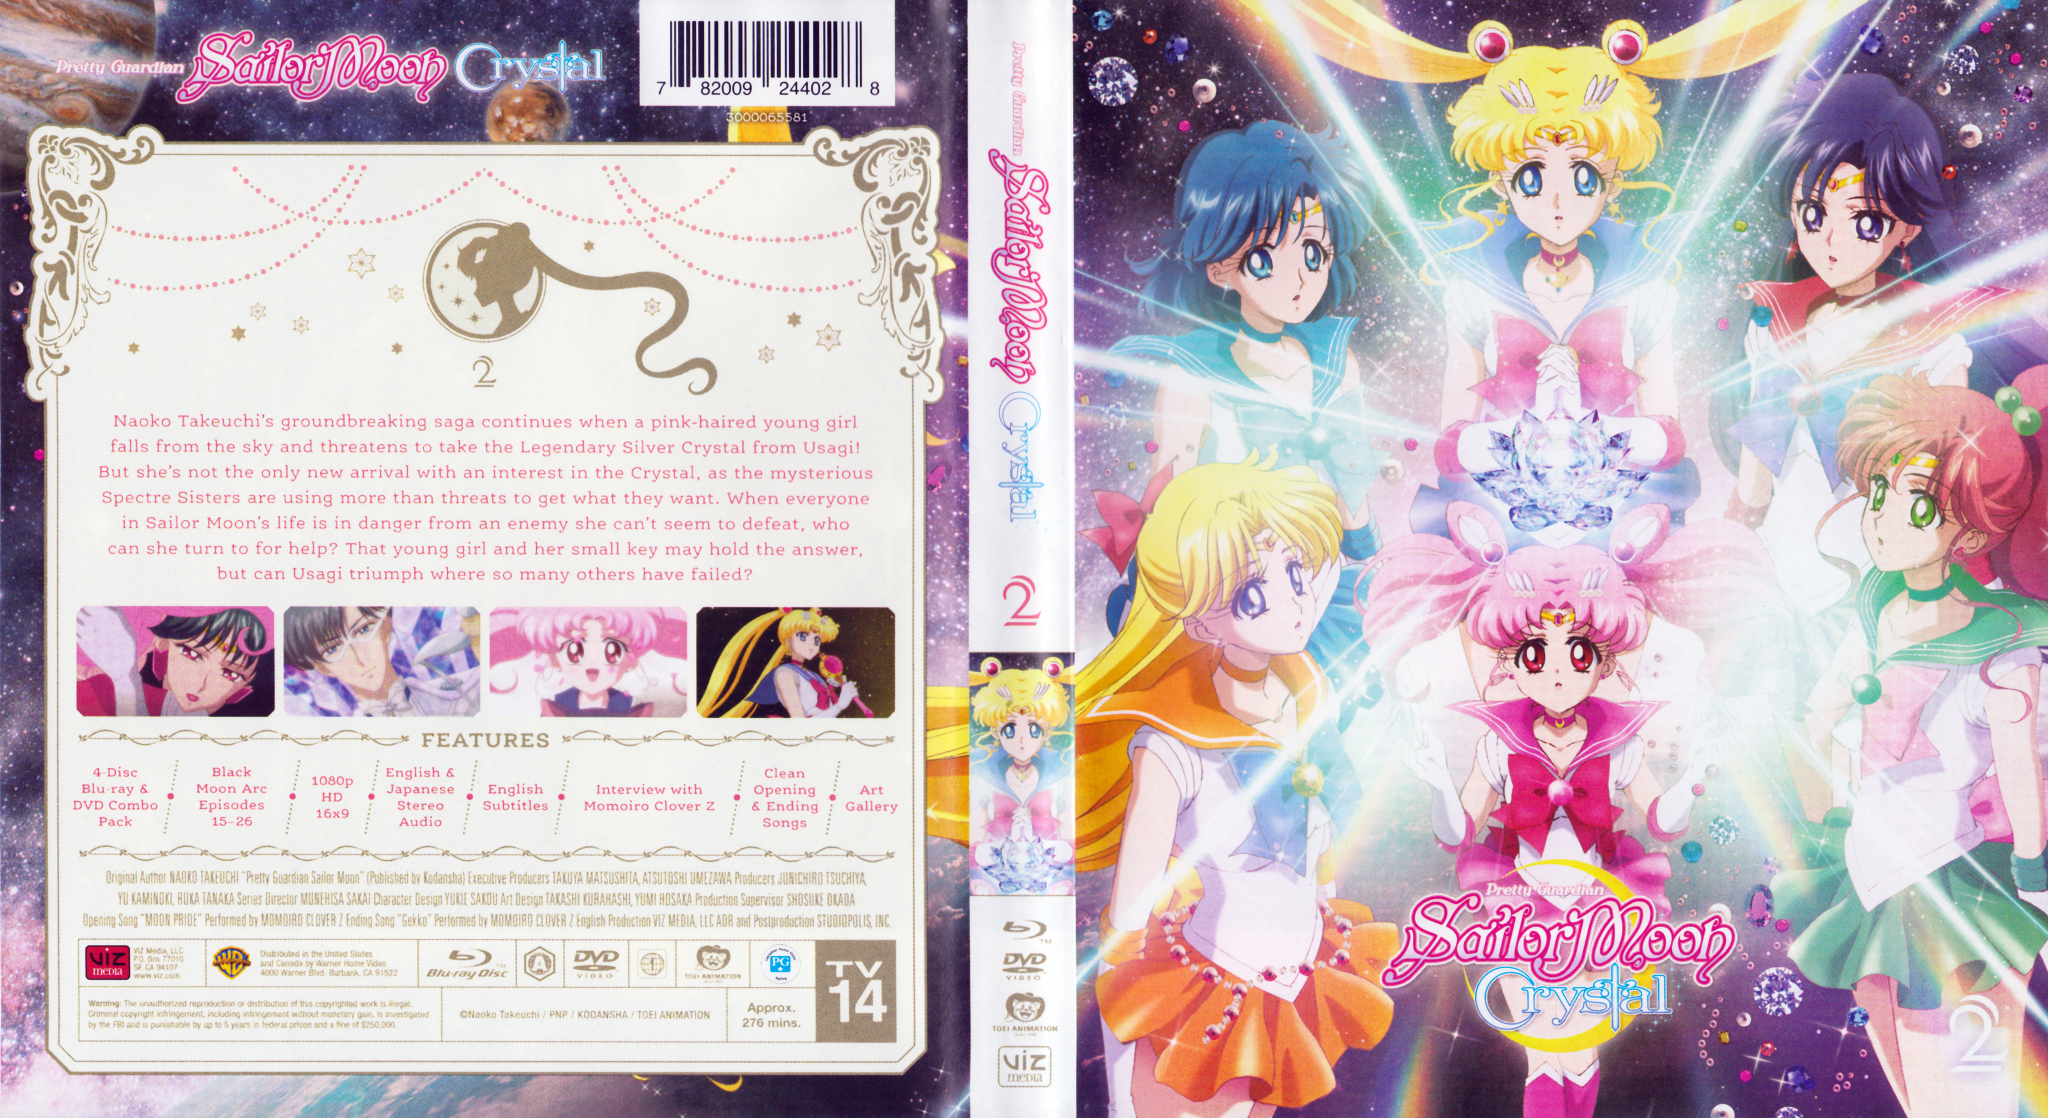 Sailor Moon Crystal Season 2 Announcements and Speculation